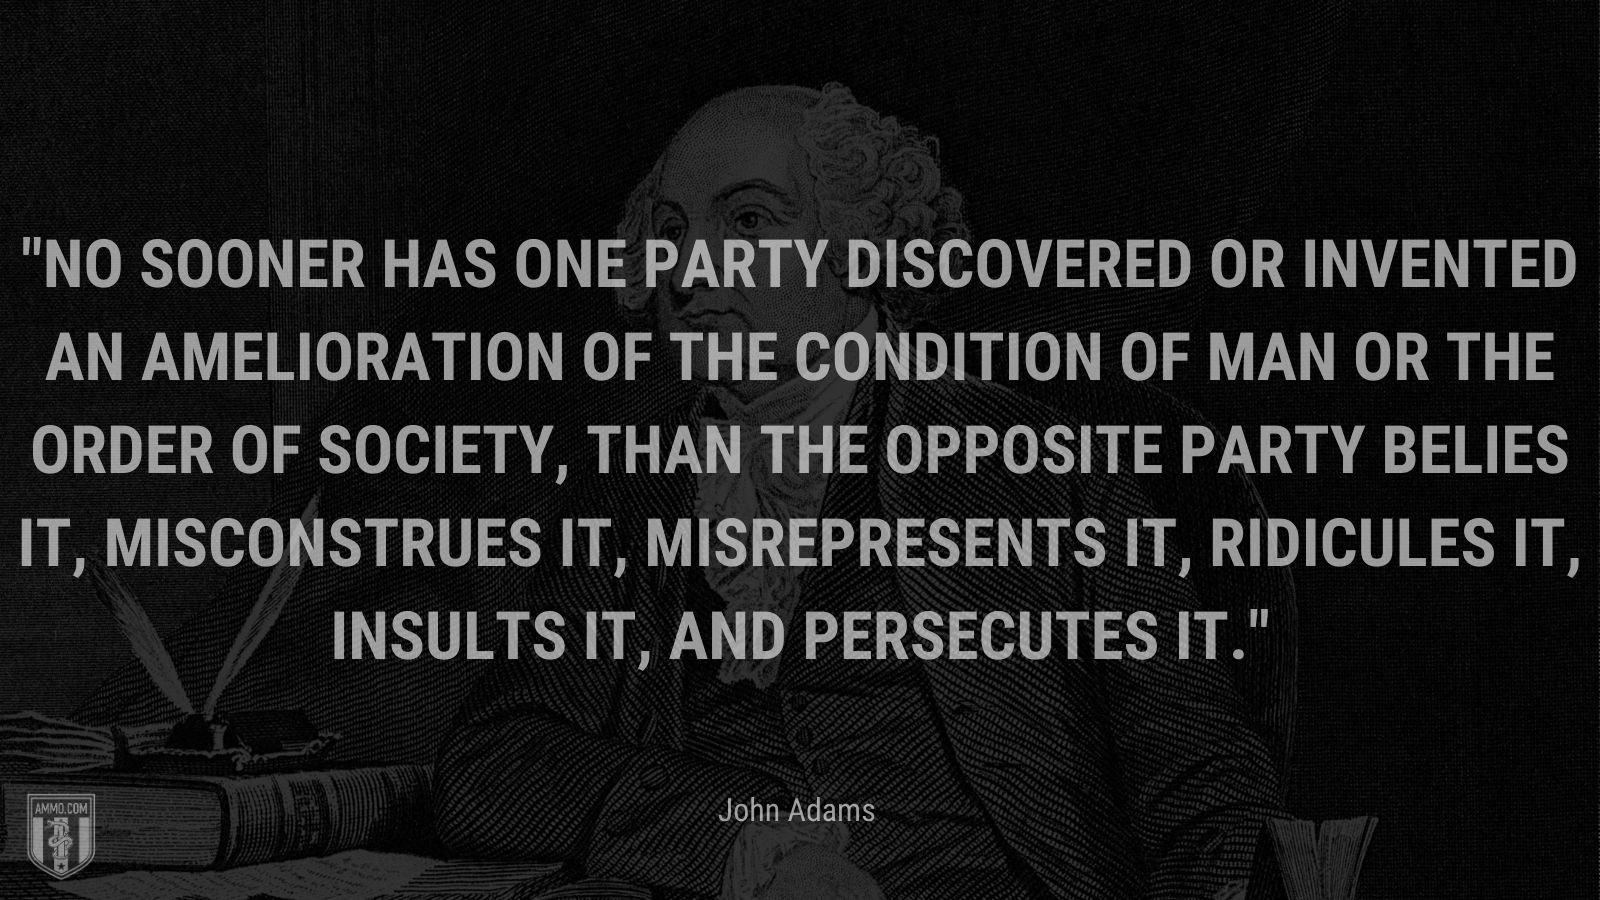 “ No sooner has one Party discovered or invented an Amelioration of the Condition of Man or the order of Society, than the opposite Party belies it, misconstrues it, misrepresents it, ridicules it, insults it, and persecutes it.” - John Adams